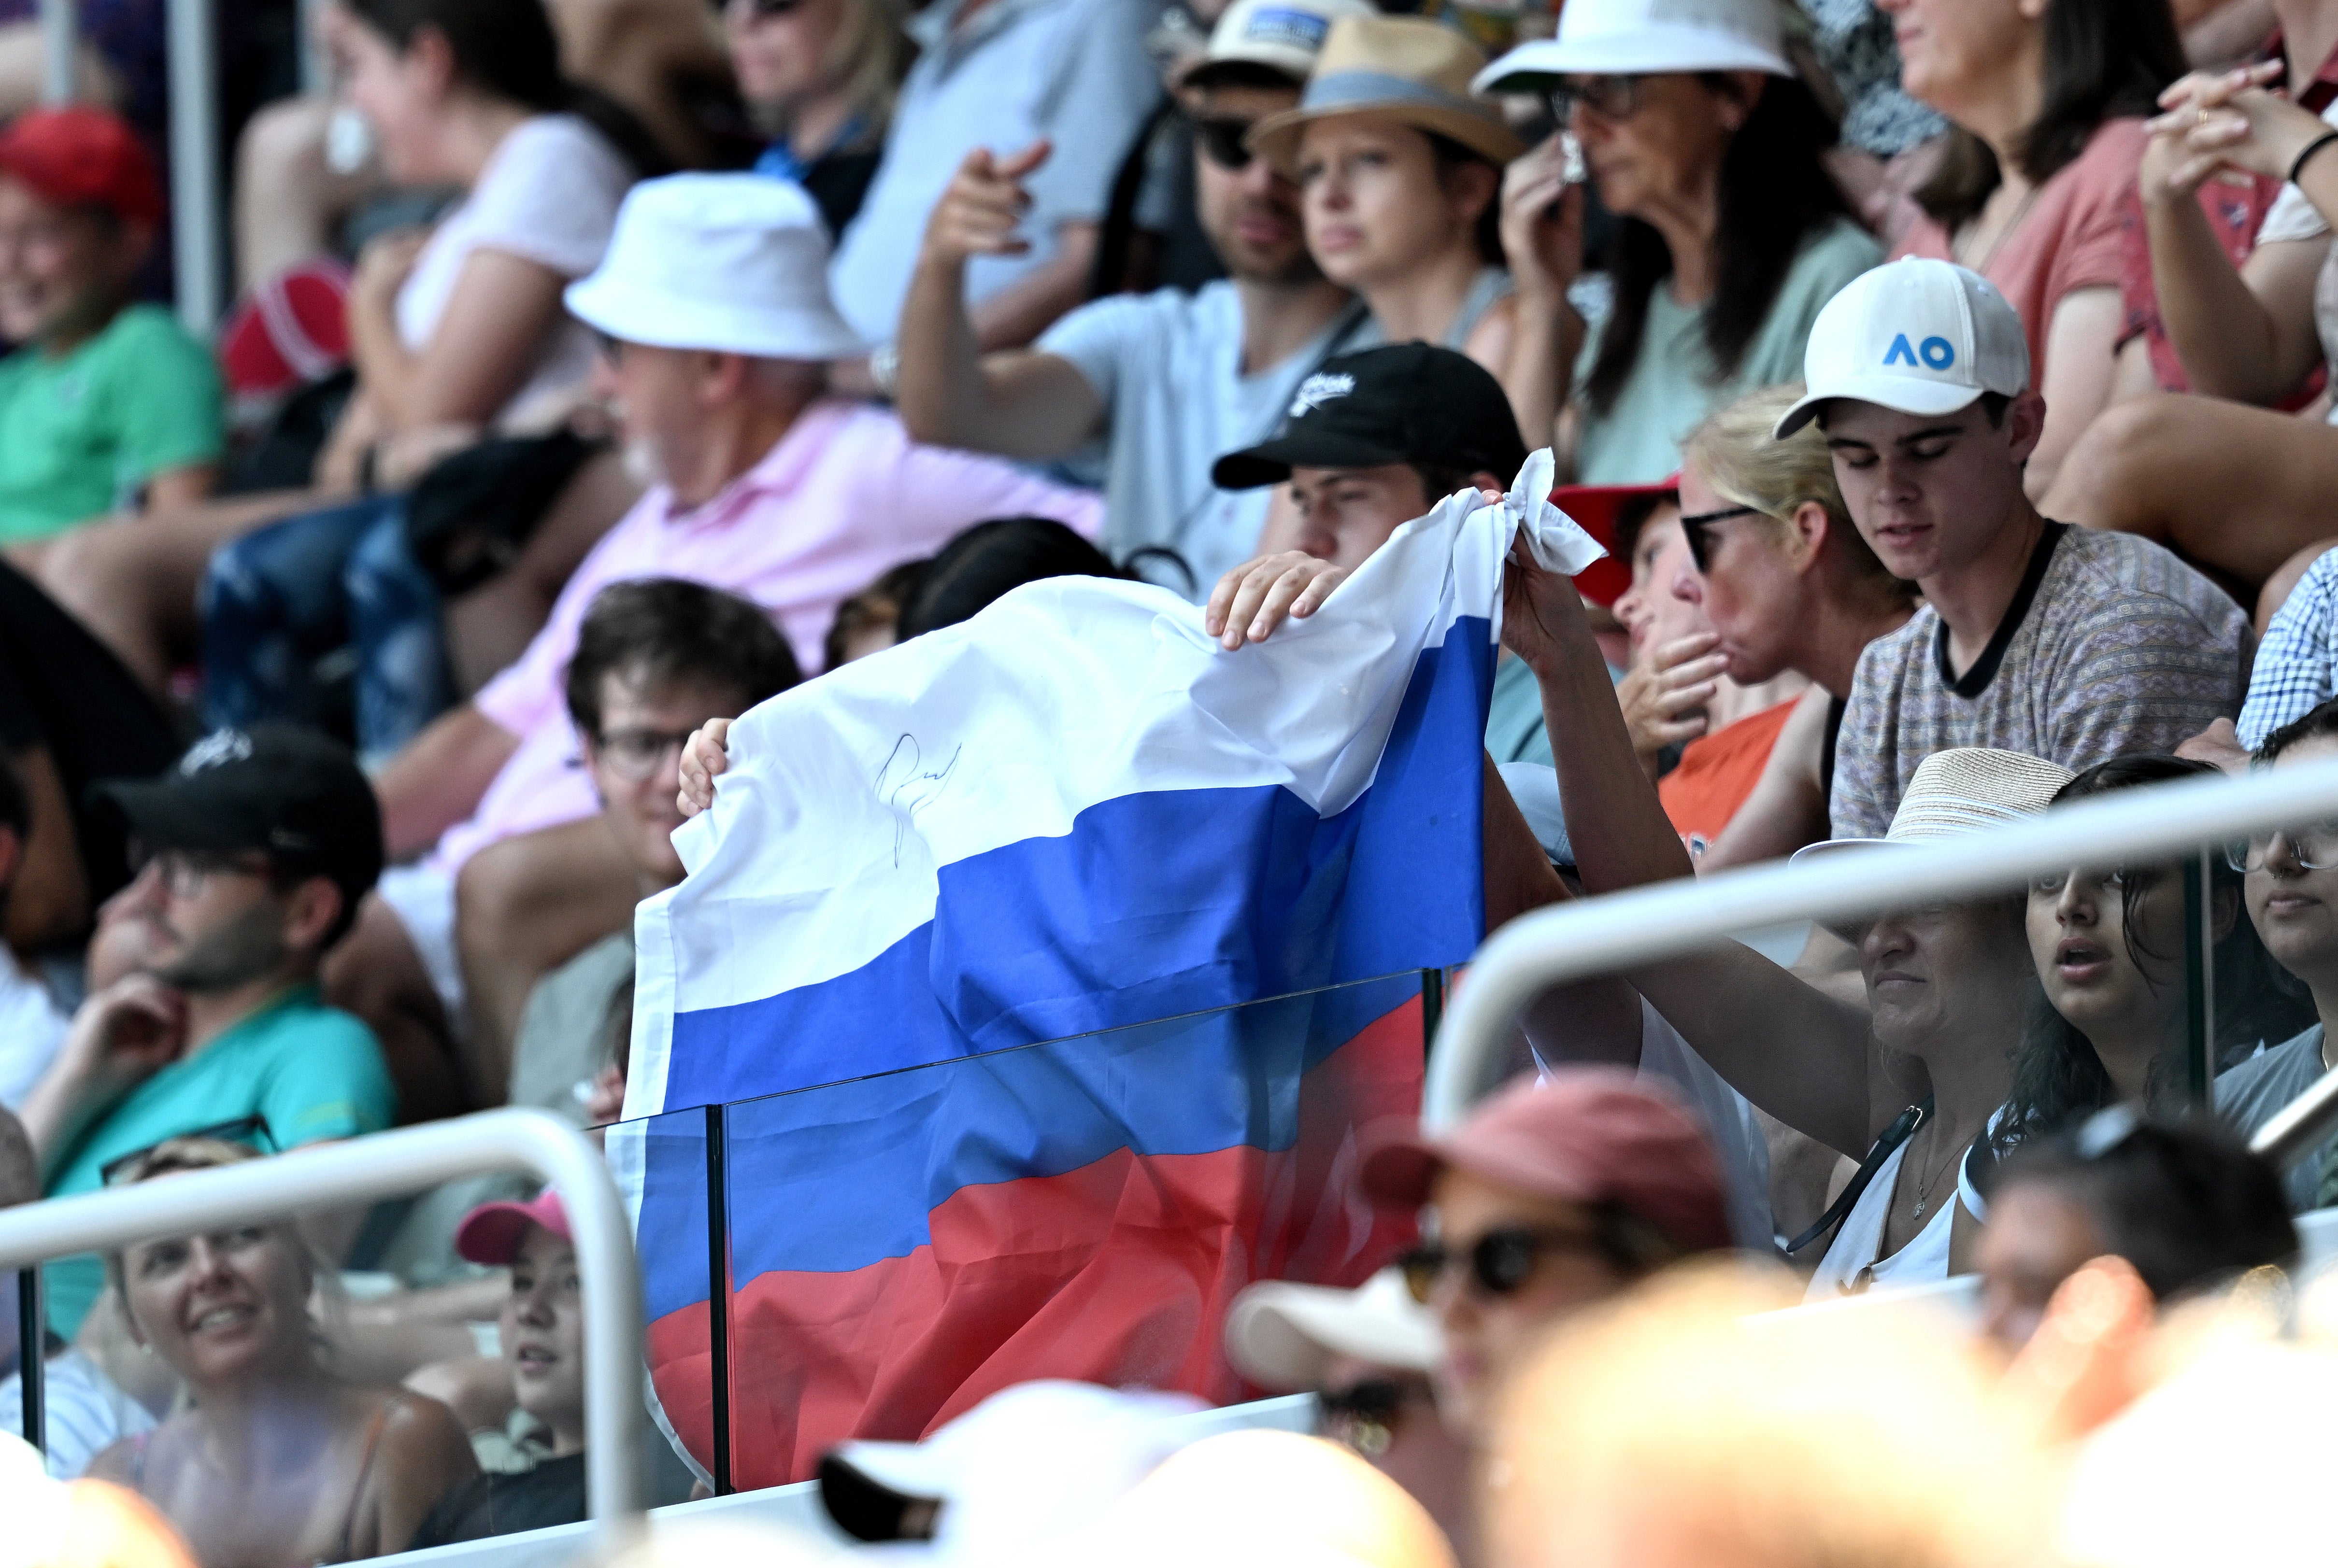 A Russian flag is displayed by spectators at the Australian Open